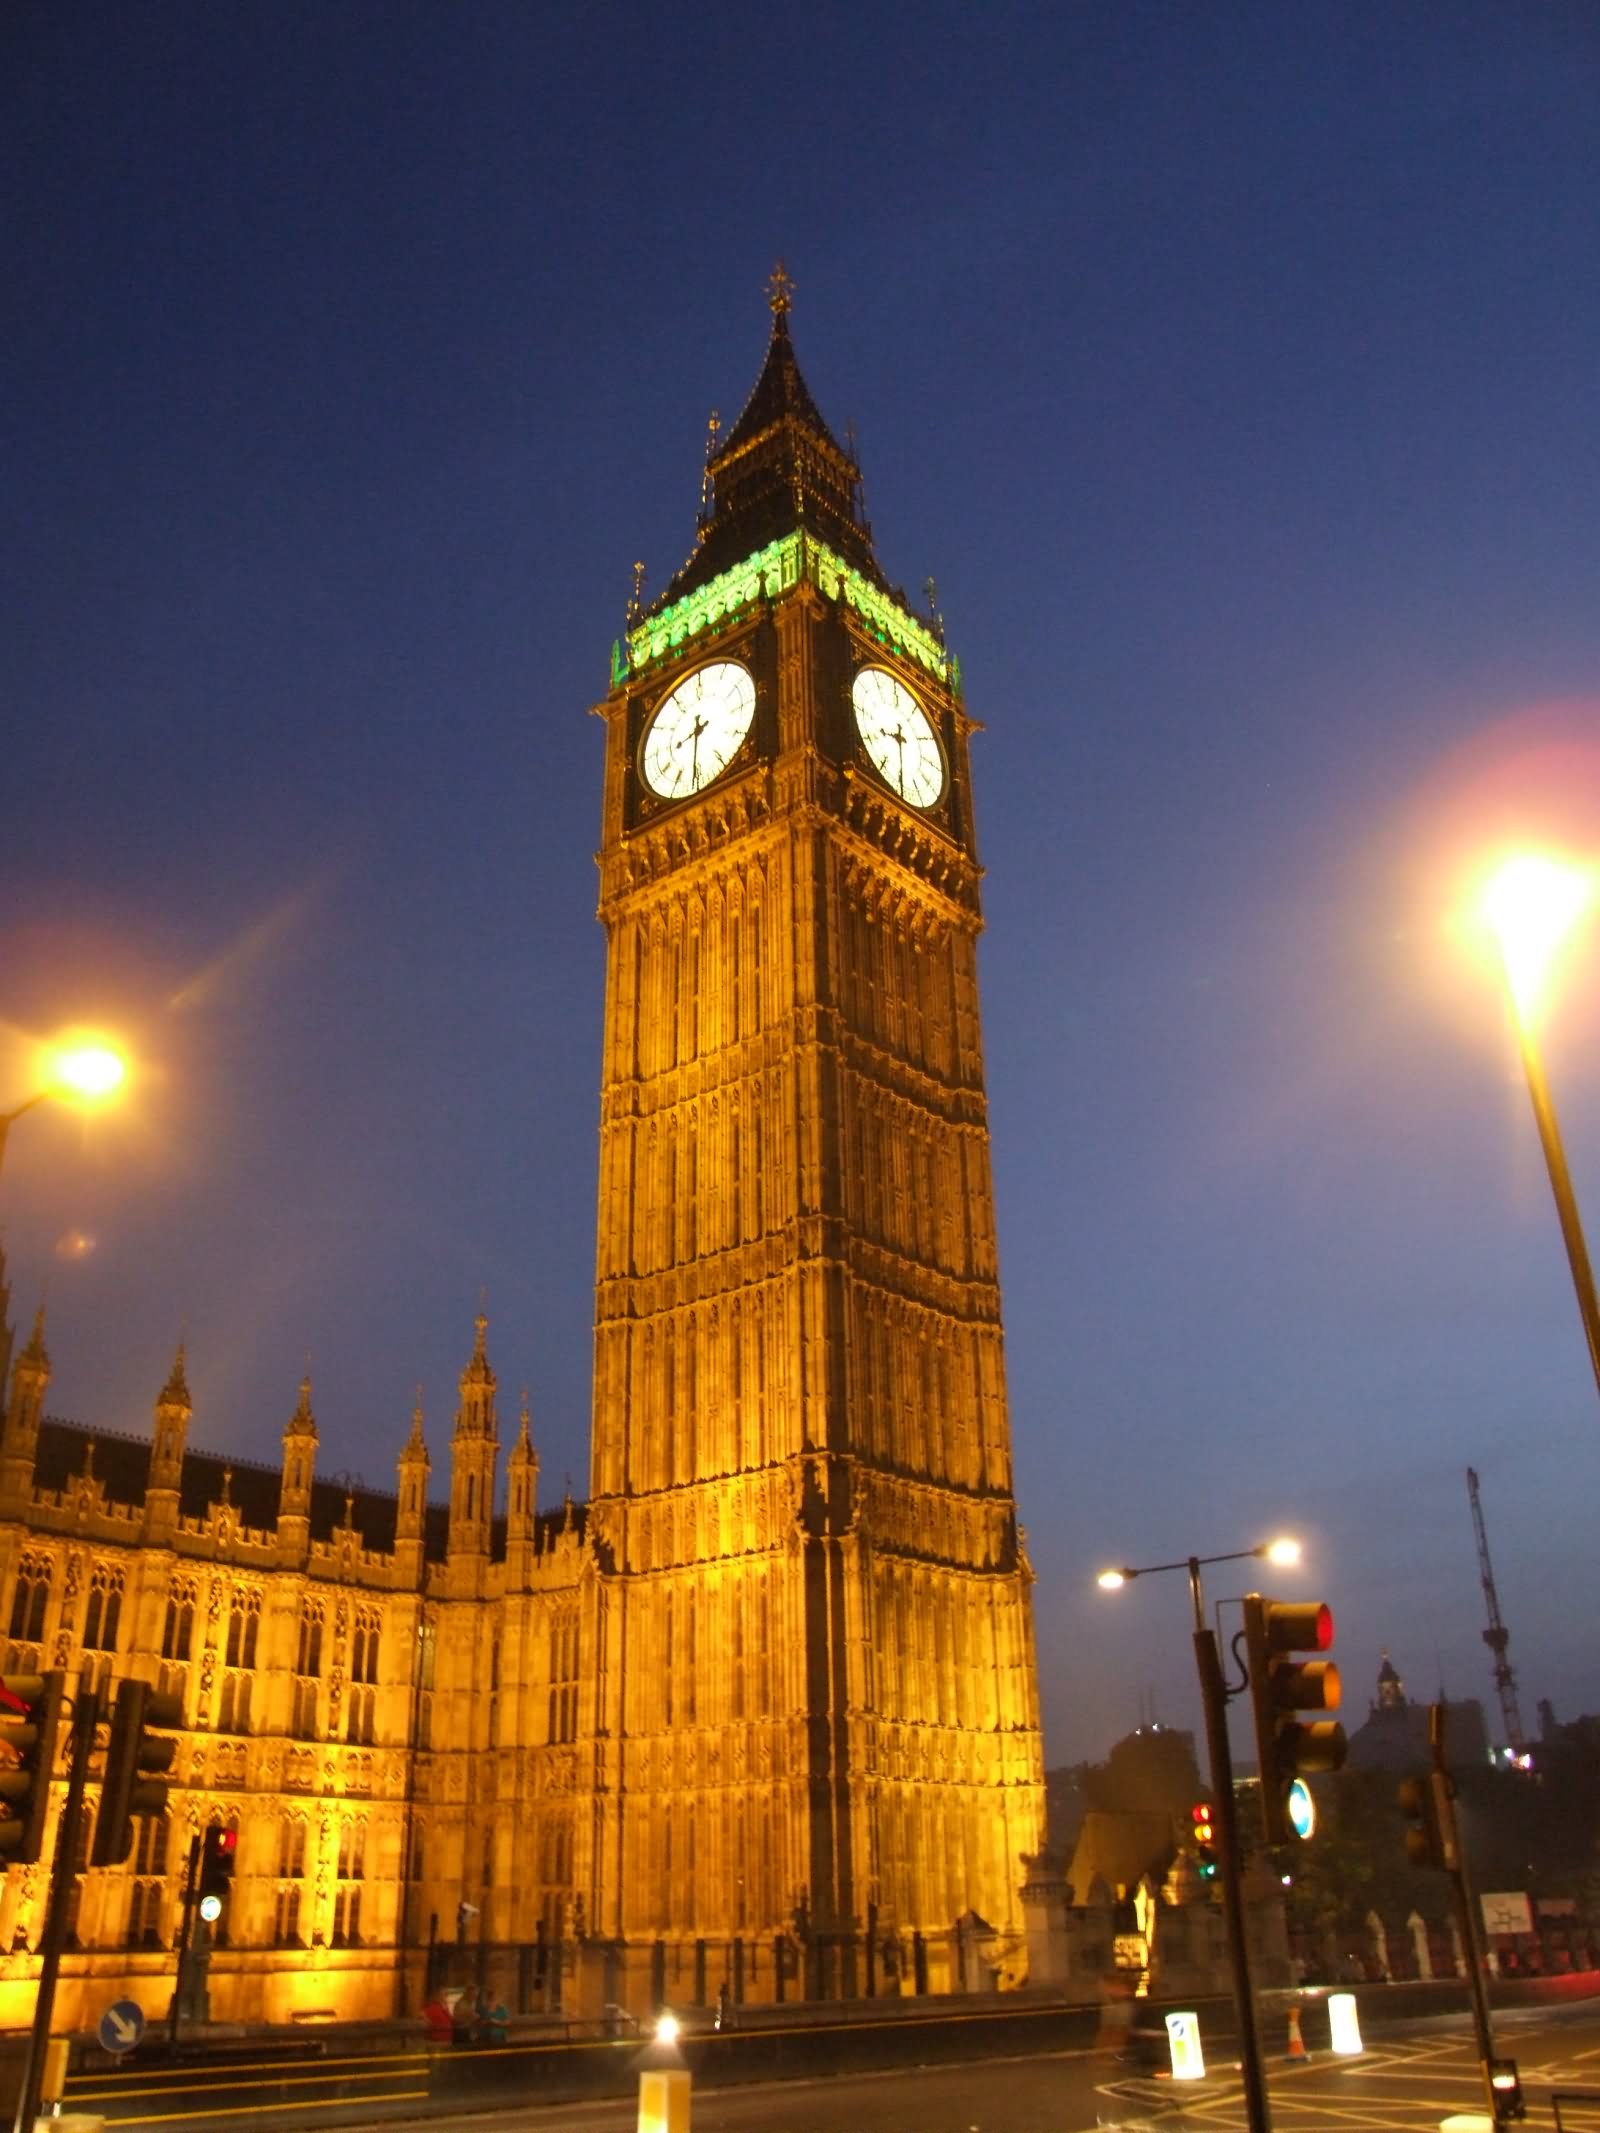 30 Incredible Night View Pictures Of Big Ben, London